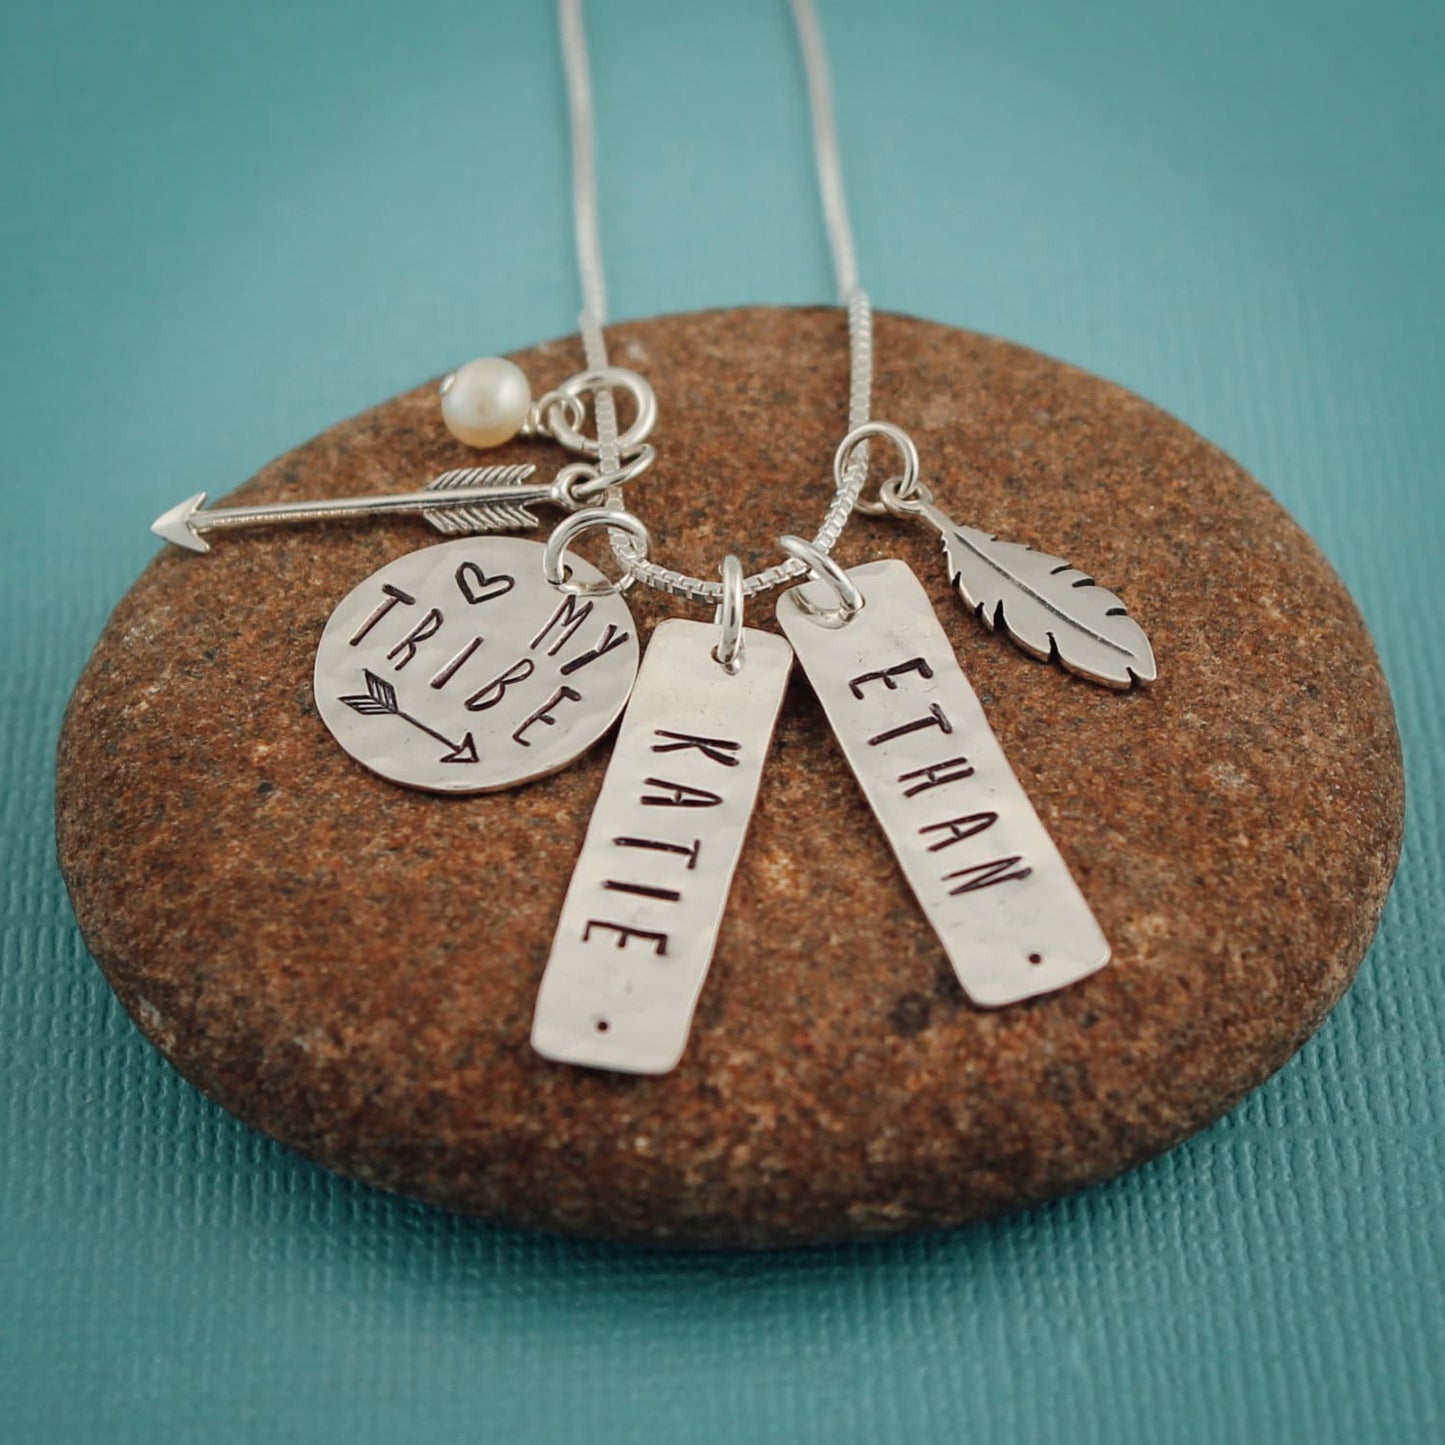 Personalized My Tribe Necklace, Mother's Necklace, My Tribe Necklace with Arrow and Feather Charm,  Hand Stamped Personalized Jewelry